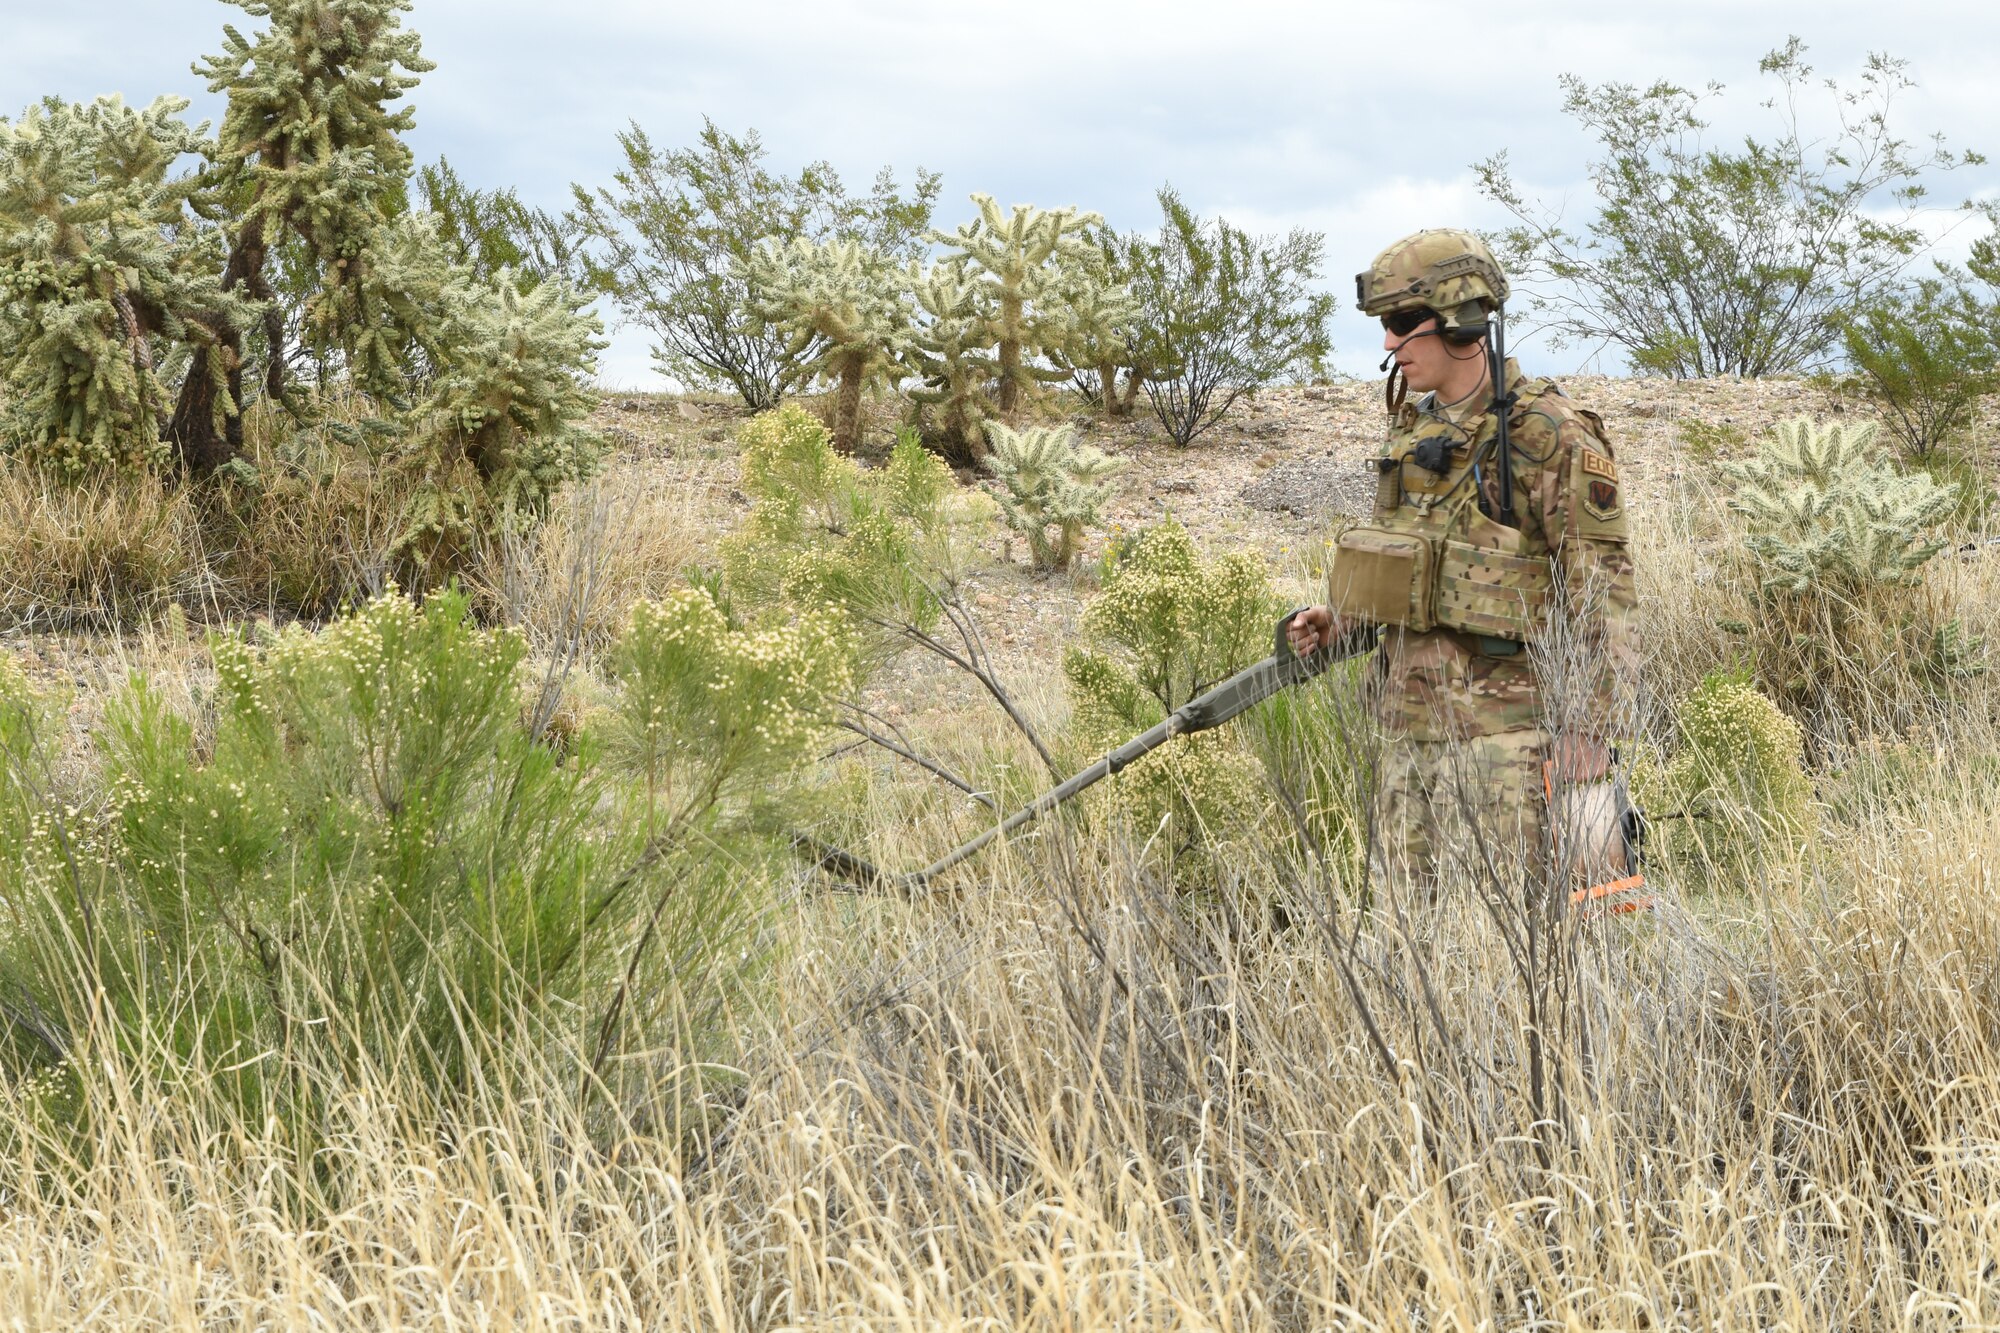 A photo of an airman with a metal detector